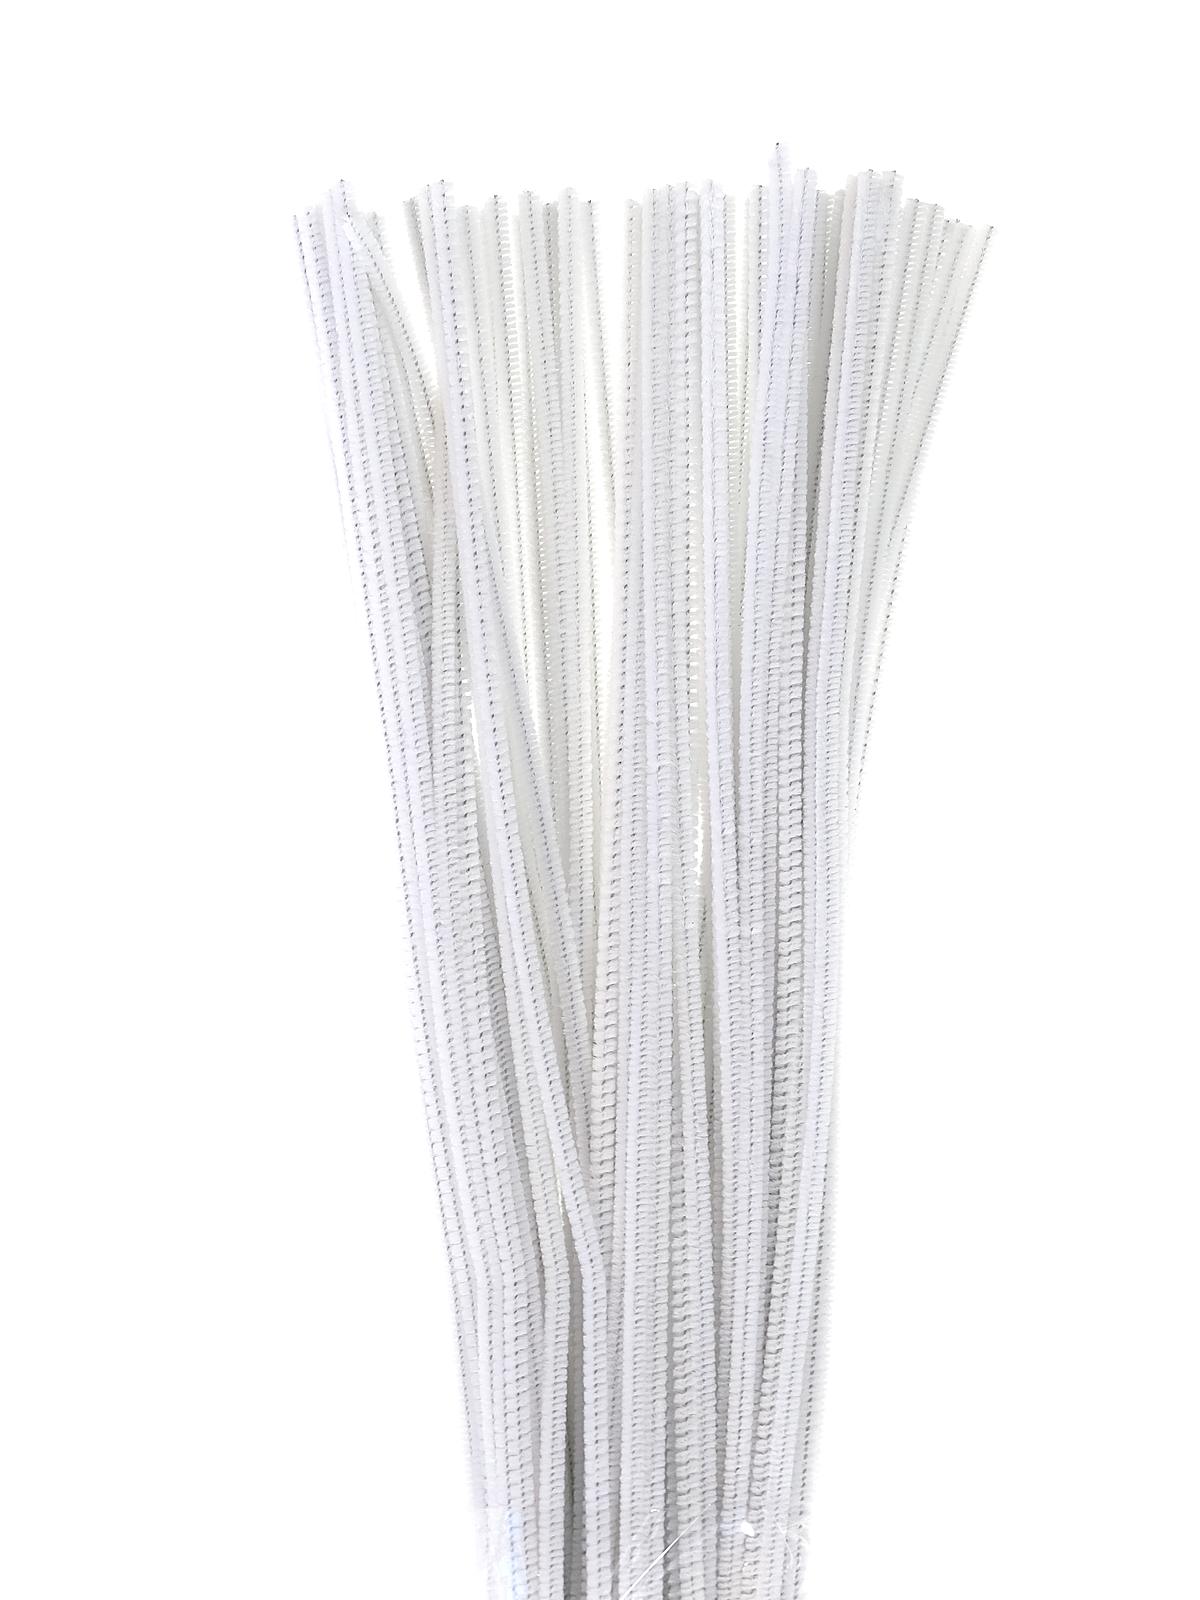 Chenille Stems 4 Mm X 12 In. 100 Pieces White